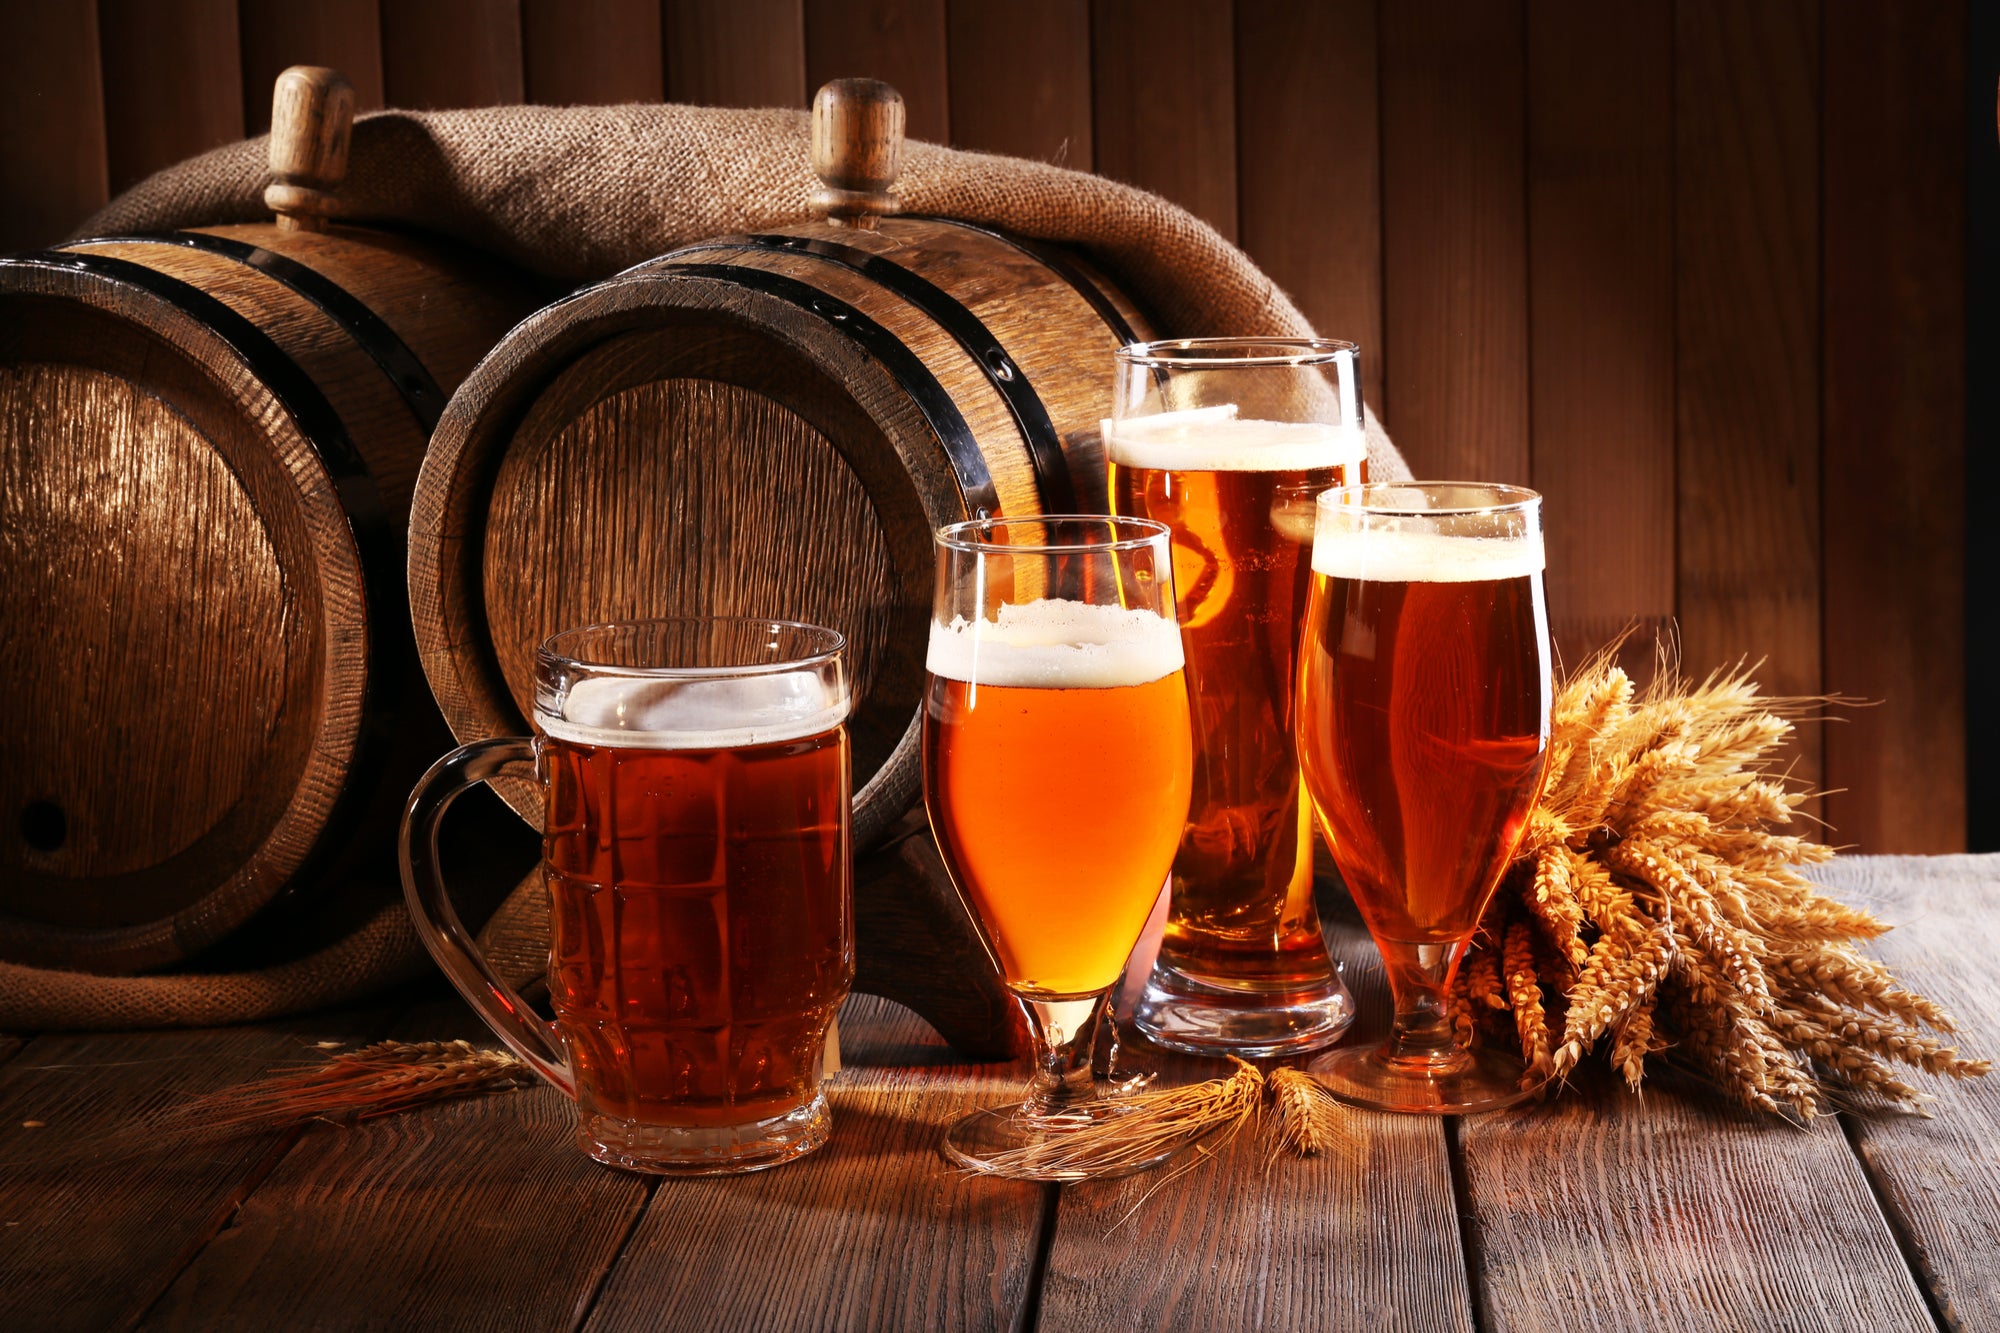 Full recovery of beer sector possible by end of this year 30